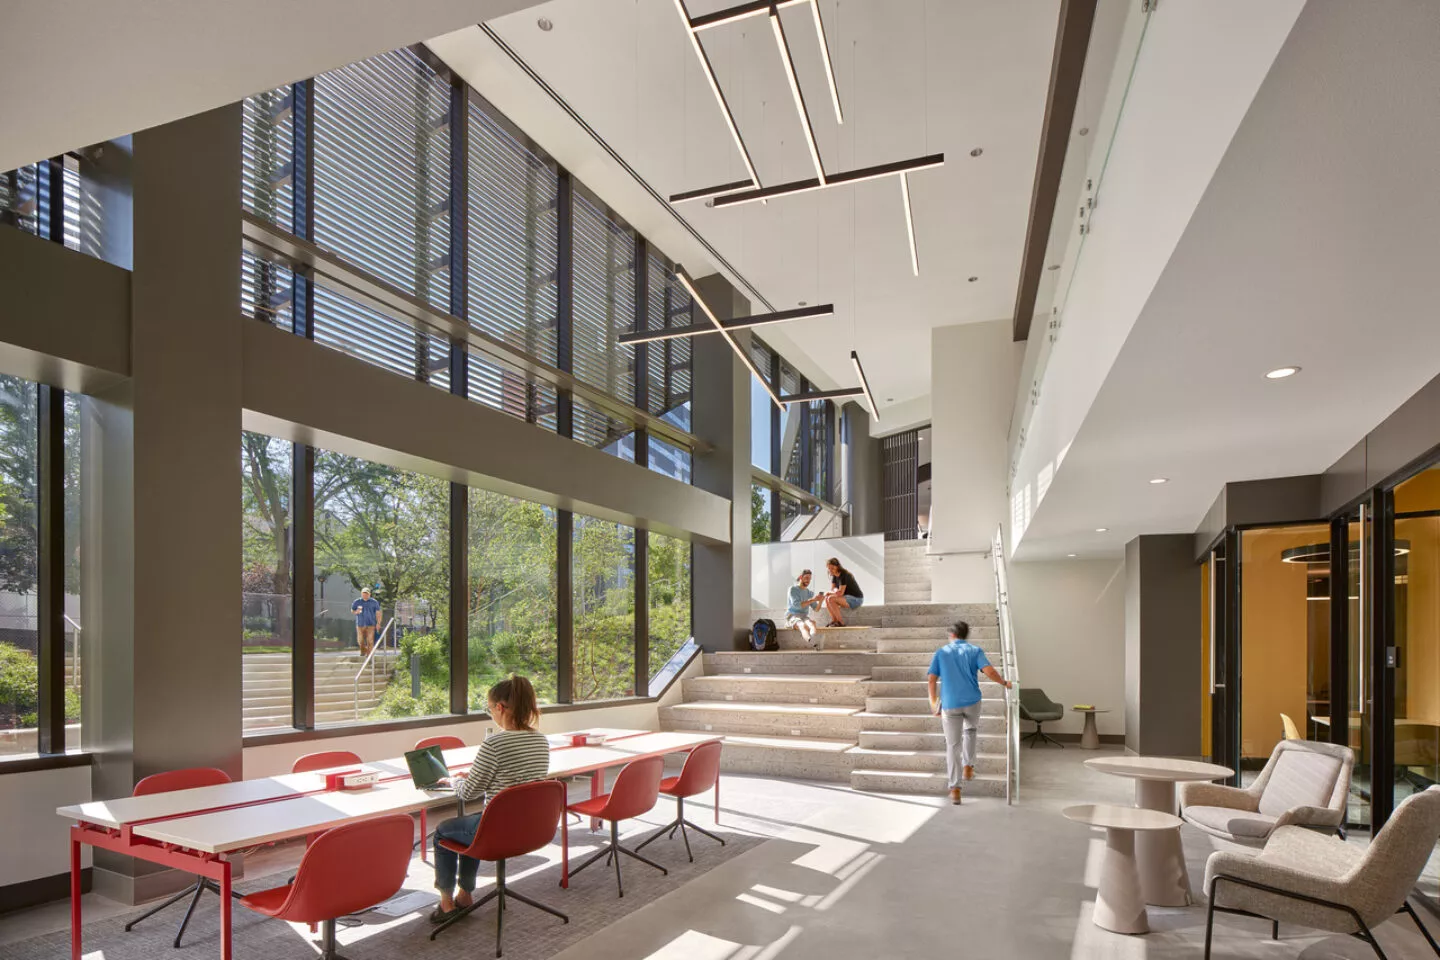 Atrium at SCB's Kelly Hall. Architecture. Adaptive Reuse. Renovation. Campus Environments. Student Residential.